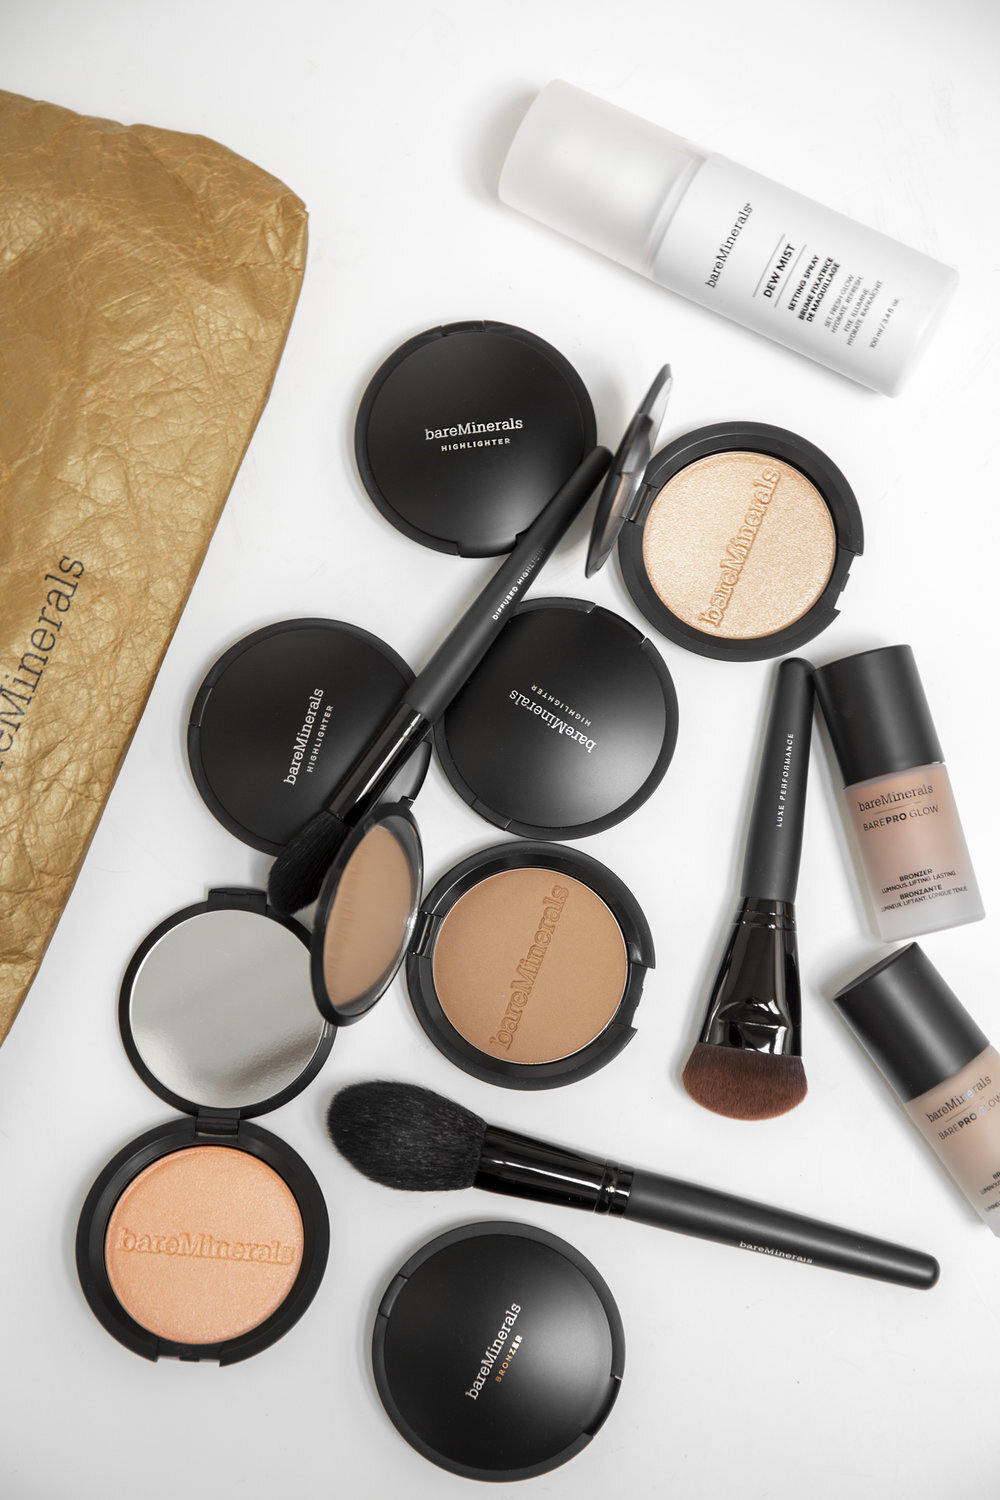 bareMinerals makeup products